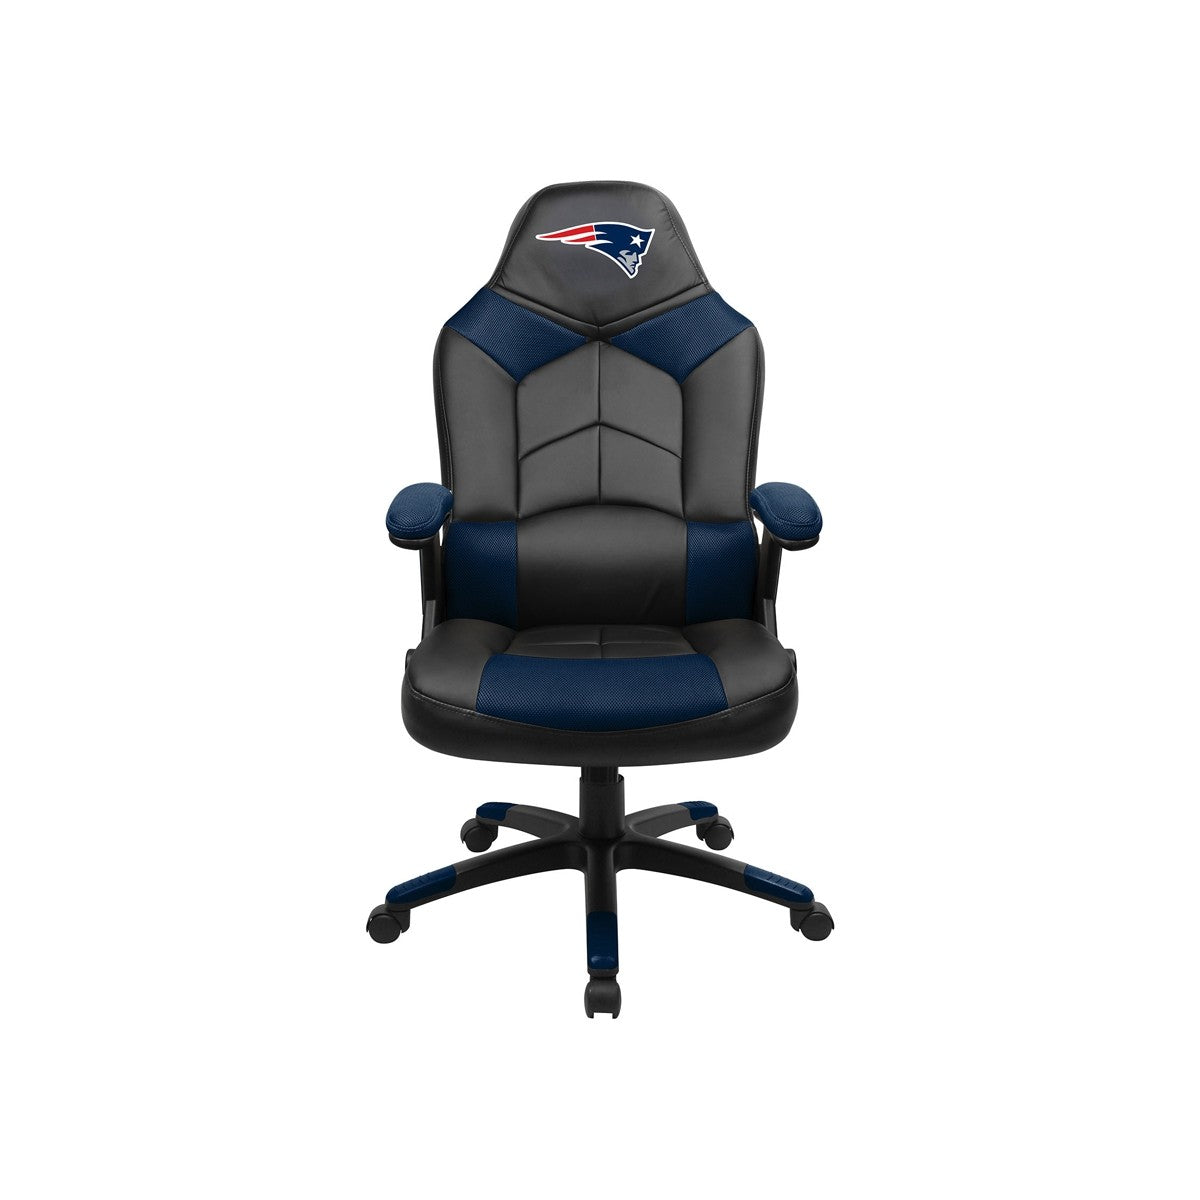 Imperial New England Patriots Oversized Gaming Chair